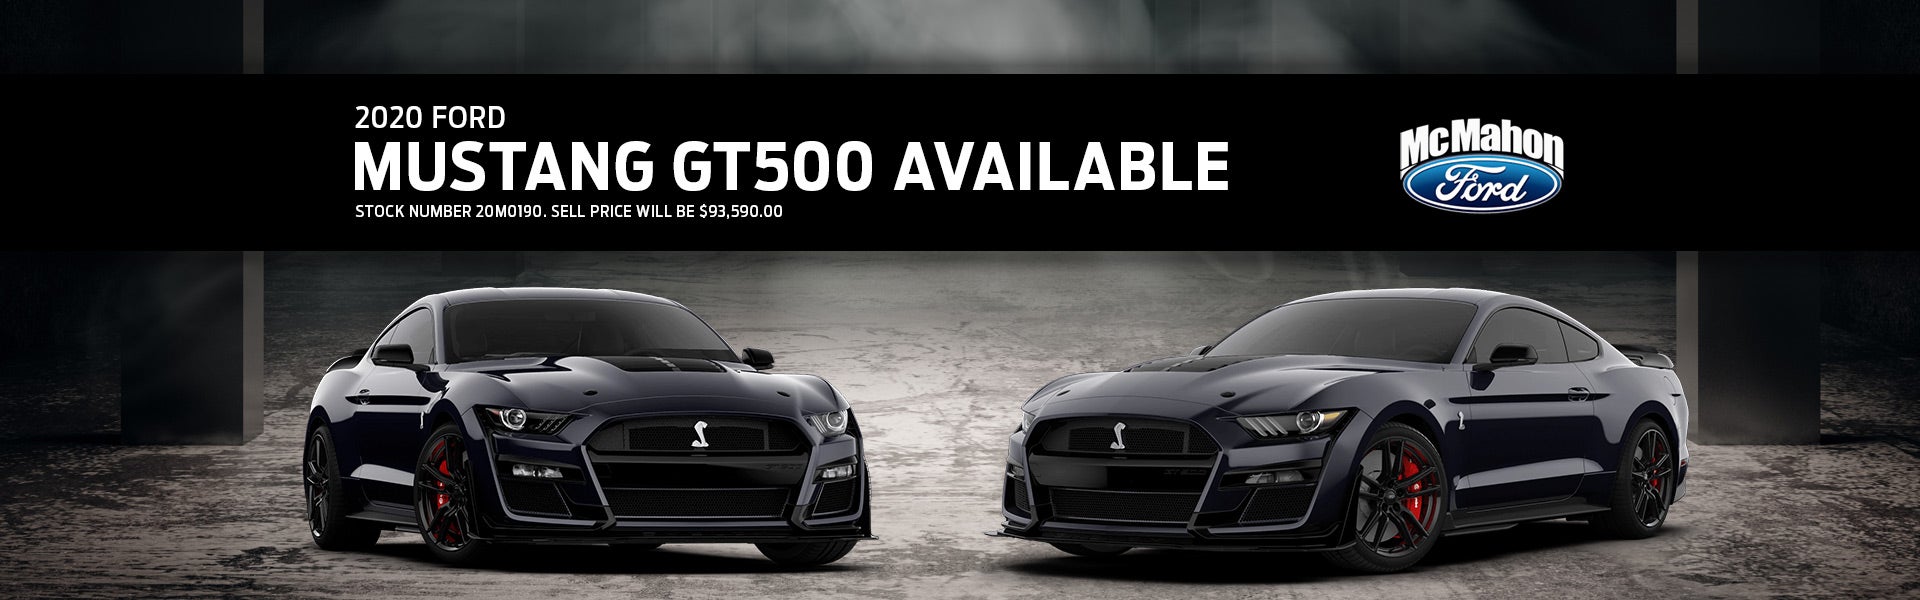 2020 Ford Mustang GT500 Available